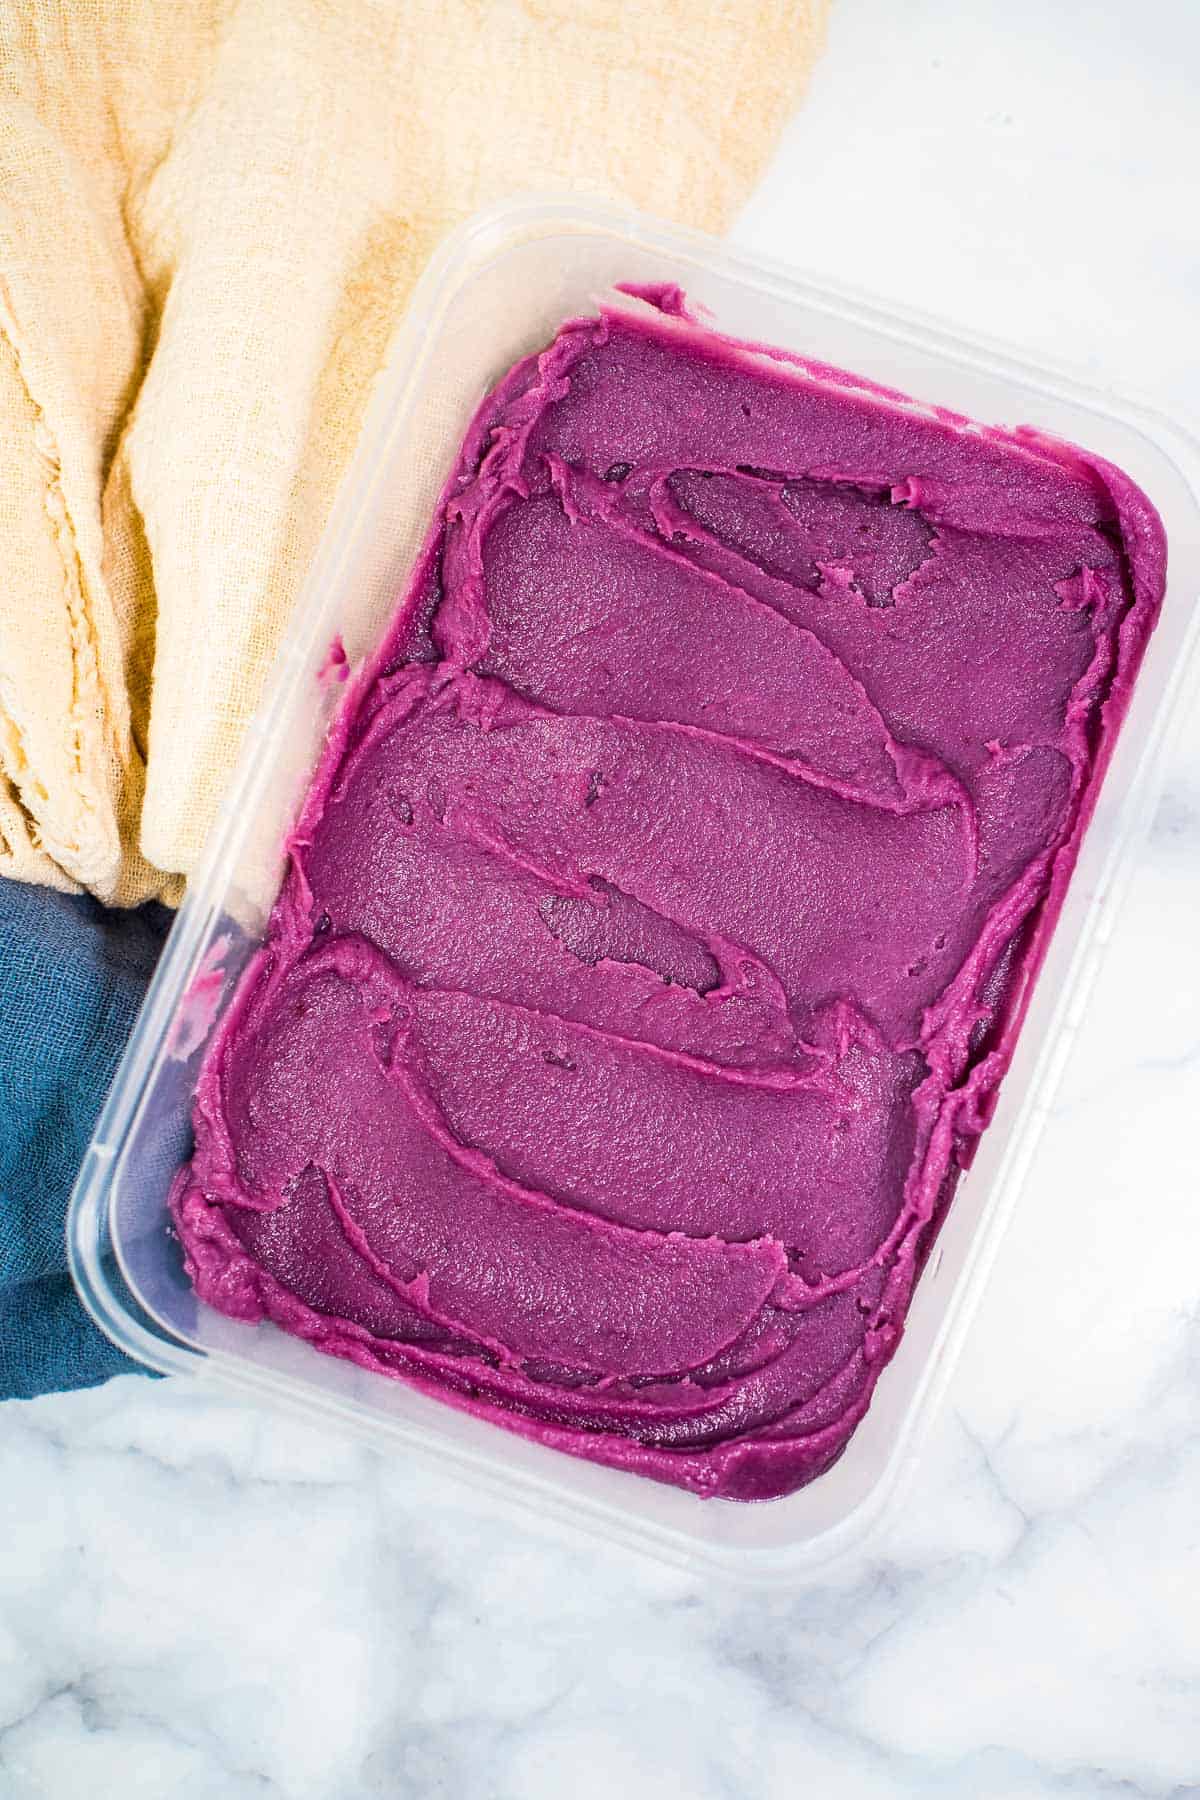 A rectangle container of purple yam jam.